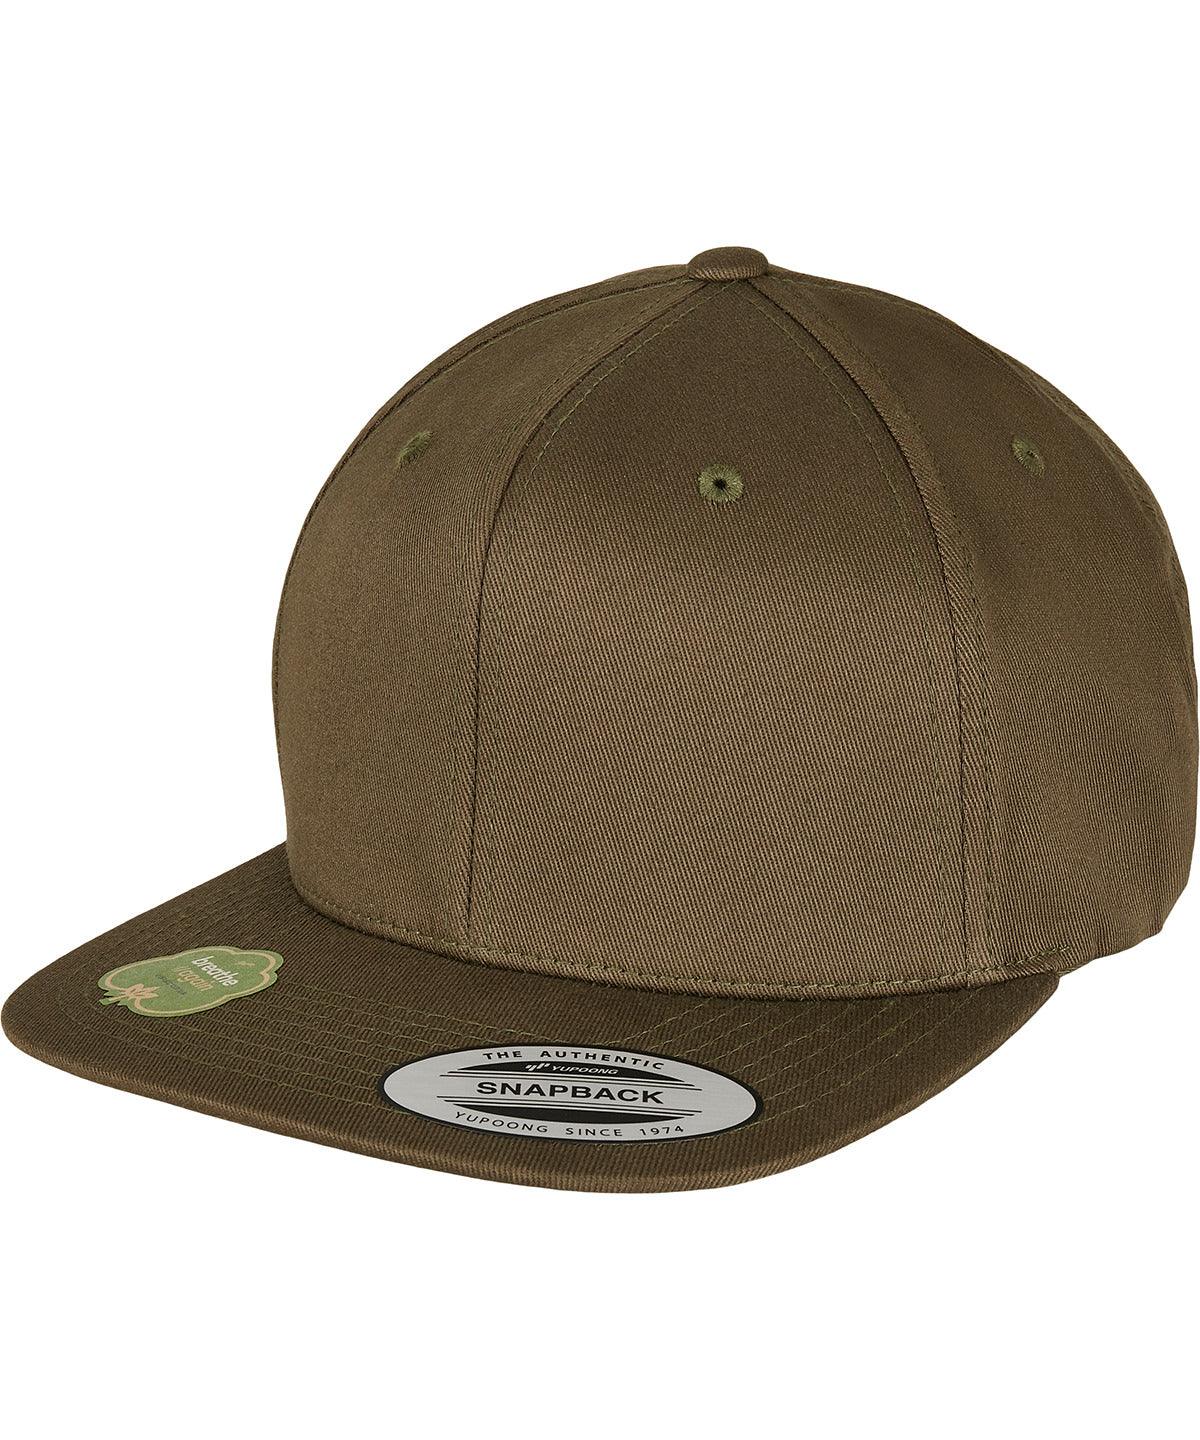 Burnt Olive - Organic cotton snapback (6089OC) Flexfit by Yupoong  HeadwearMust HavesNew Colours for 2023Organic & ConsciousRebrandable